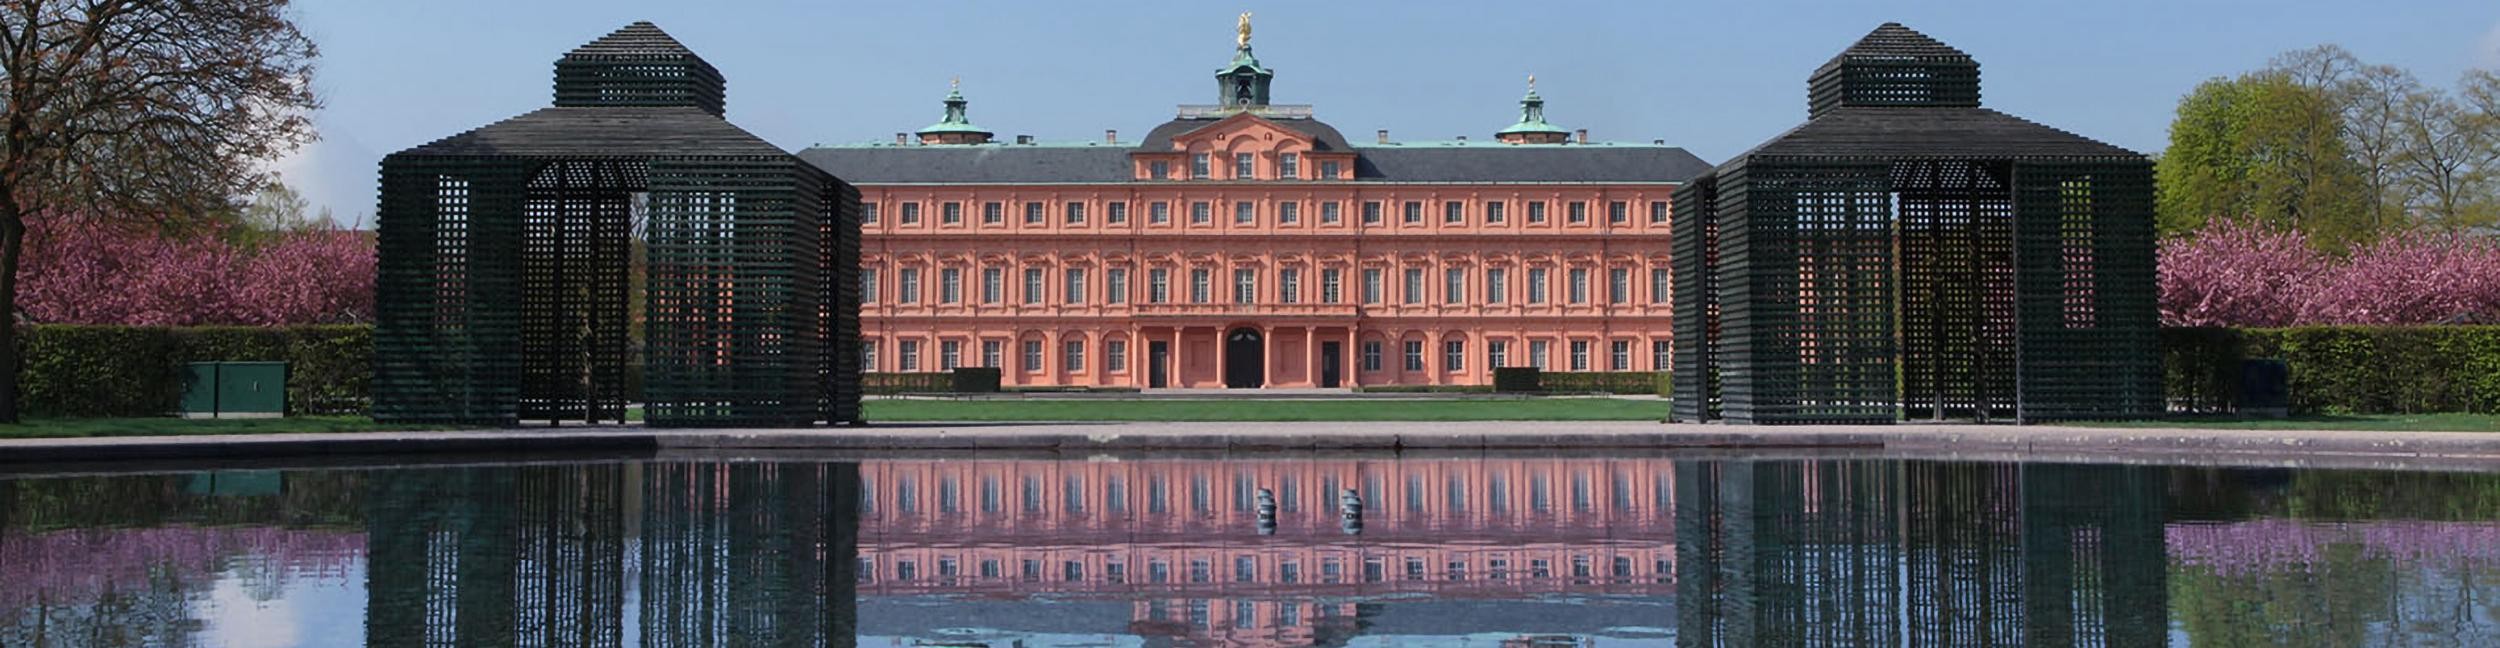 Rastatt Palace with a view of the cour d'honneur